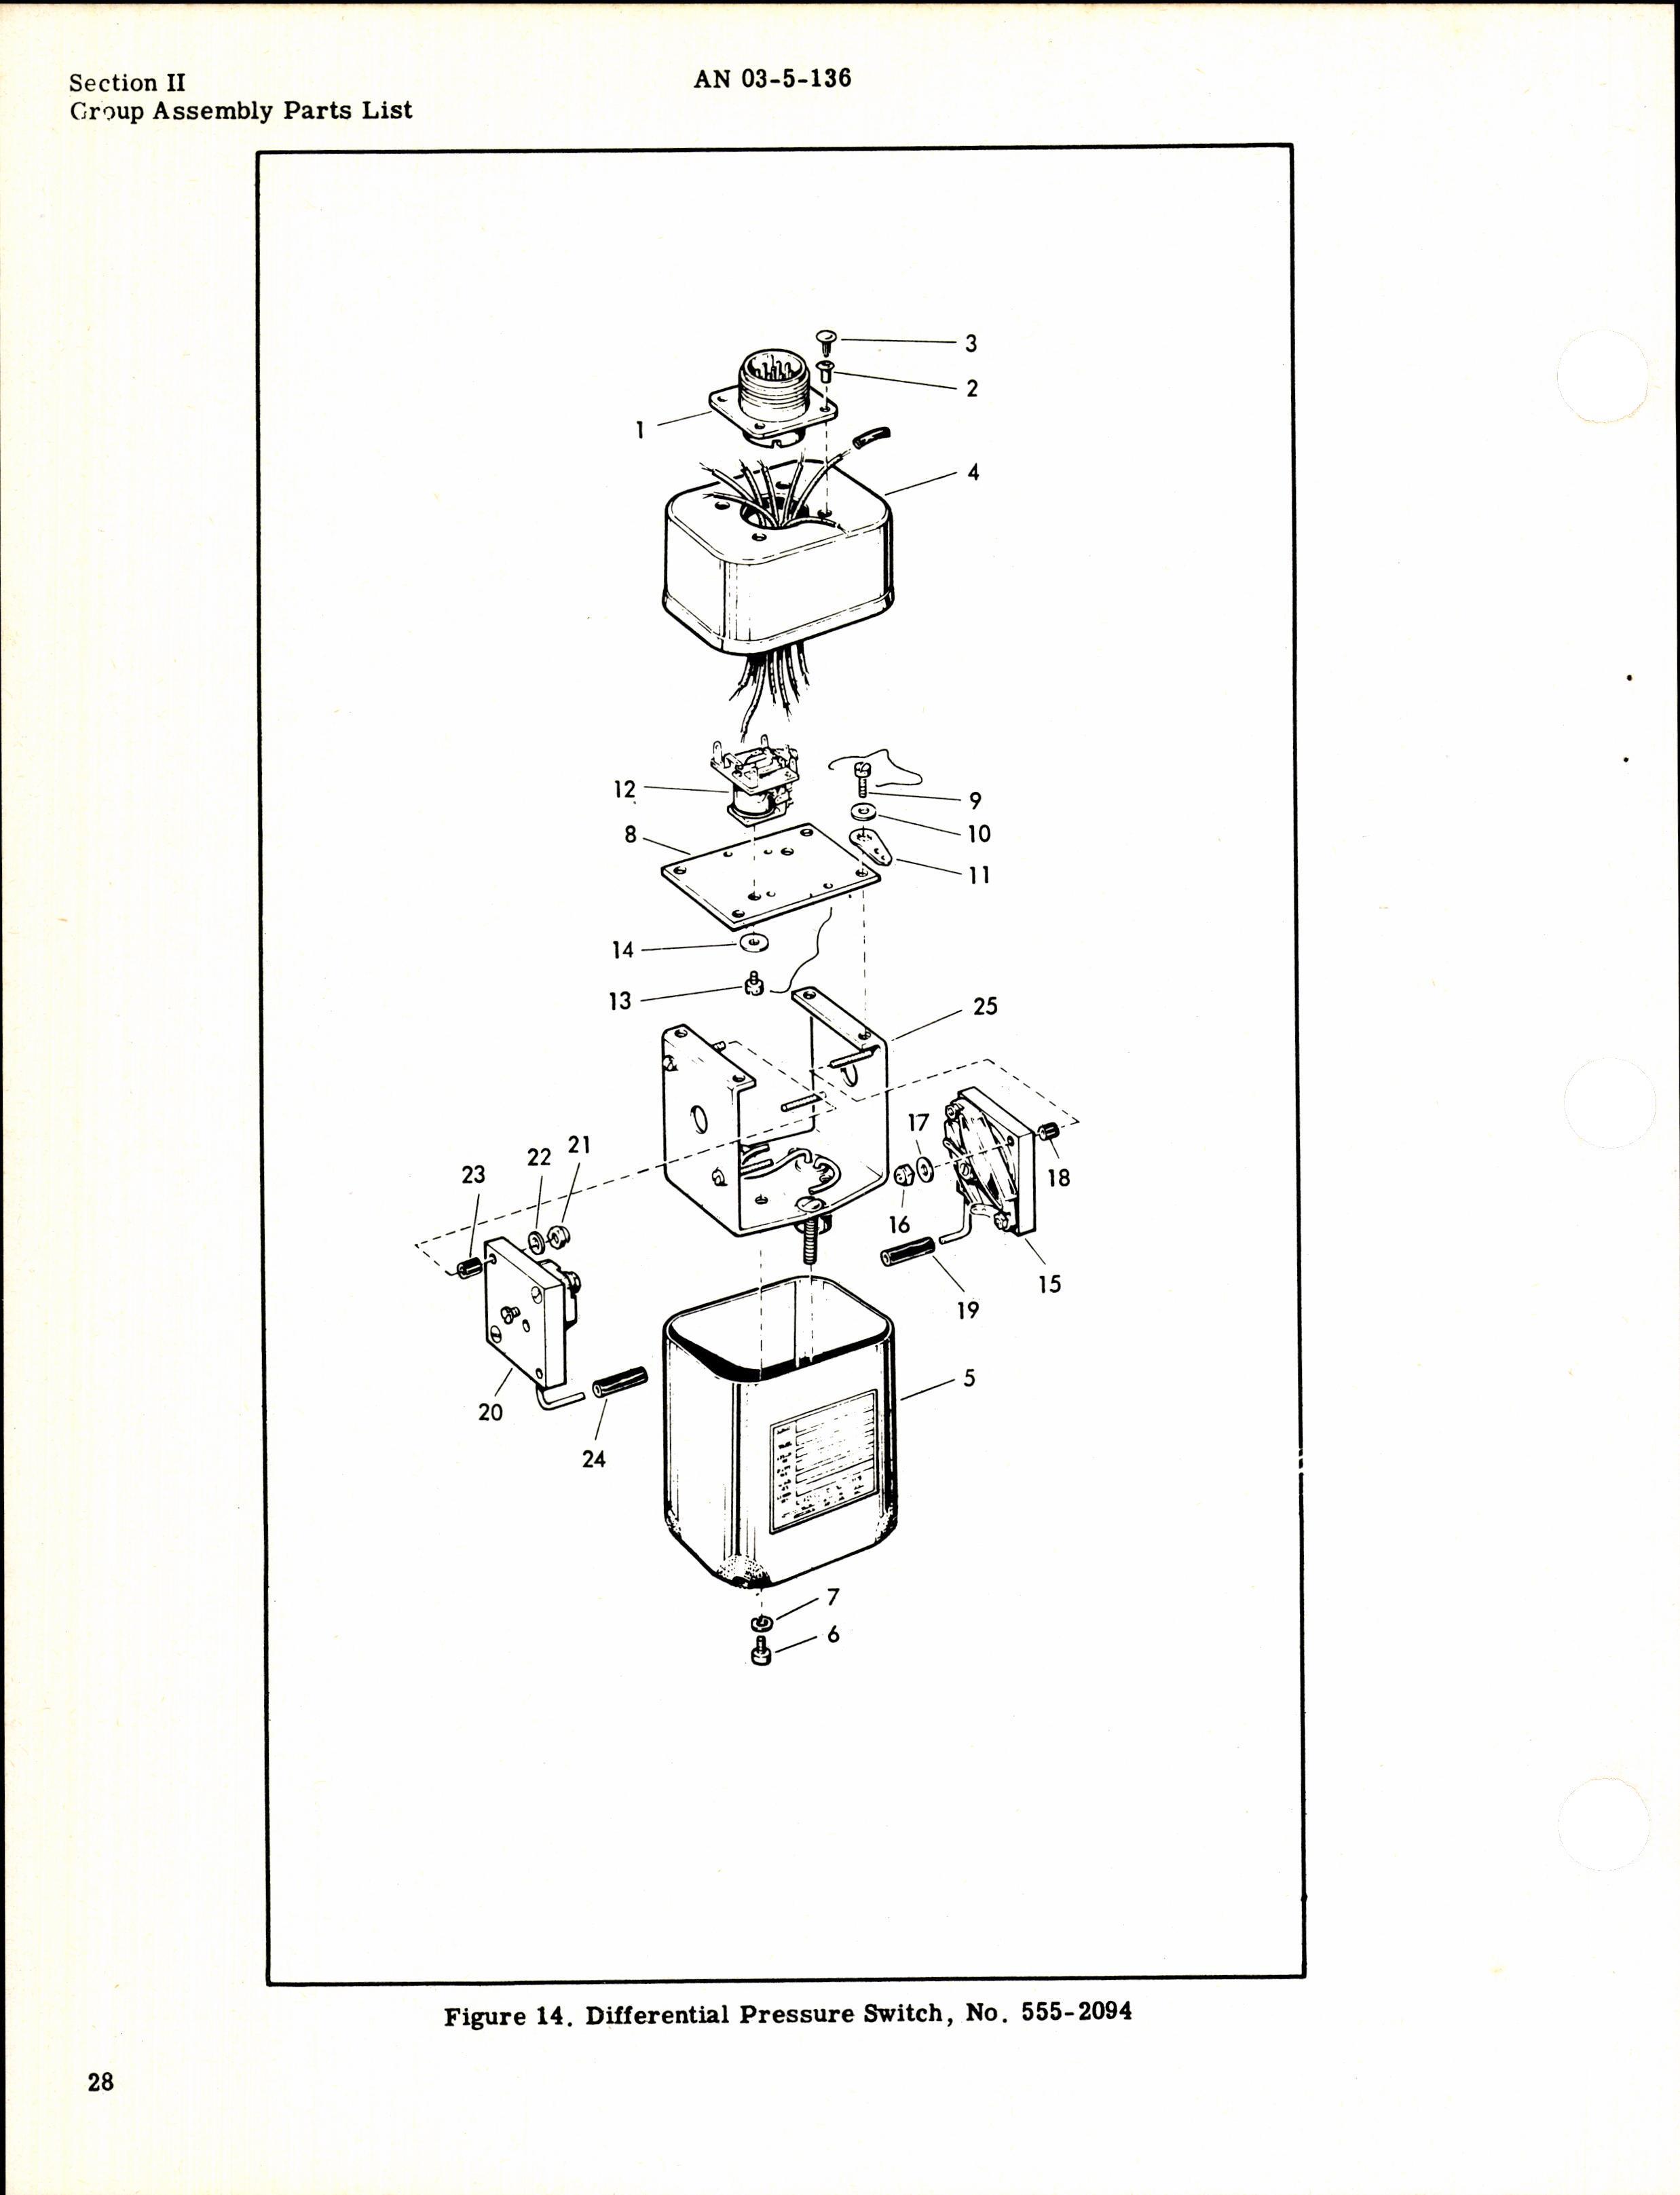 Sample page 8 from AirCorps Library document: Parts Catalog for Cook Pressure Control Switches